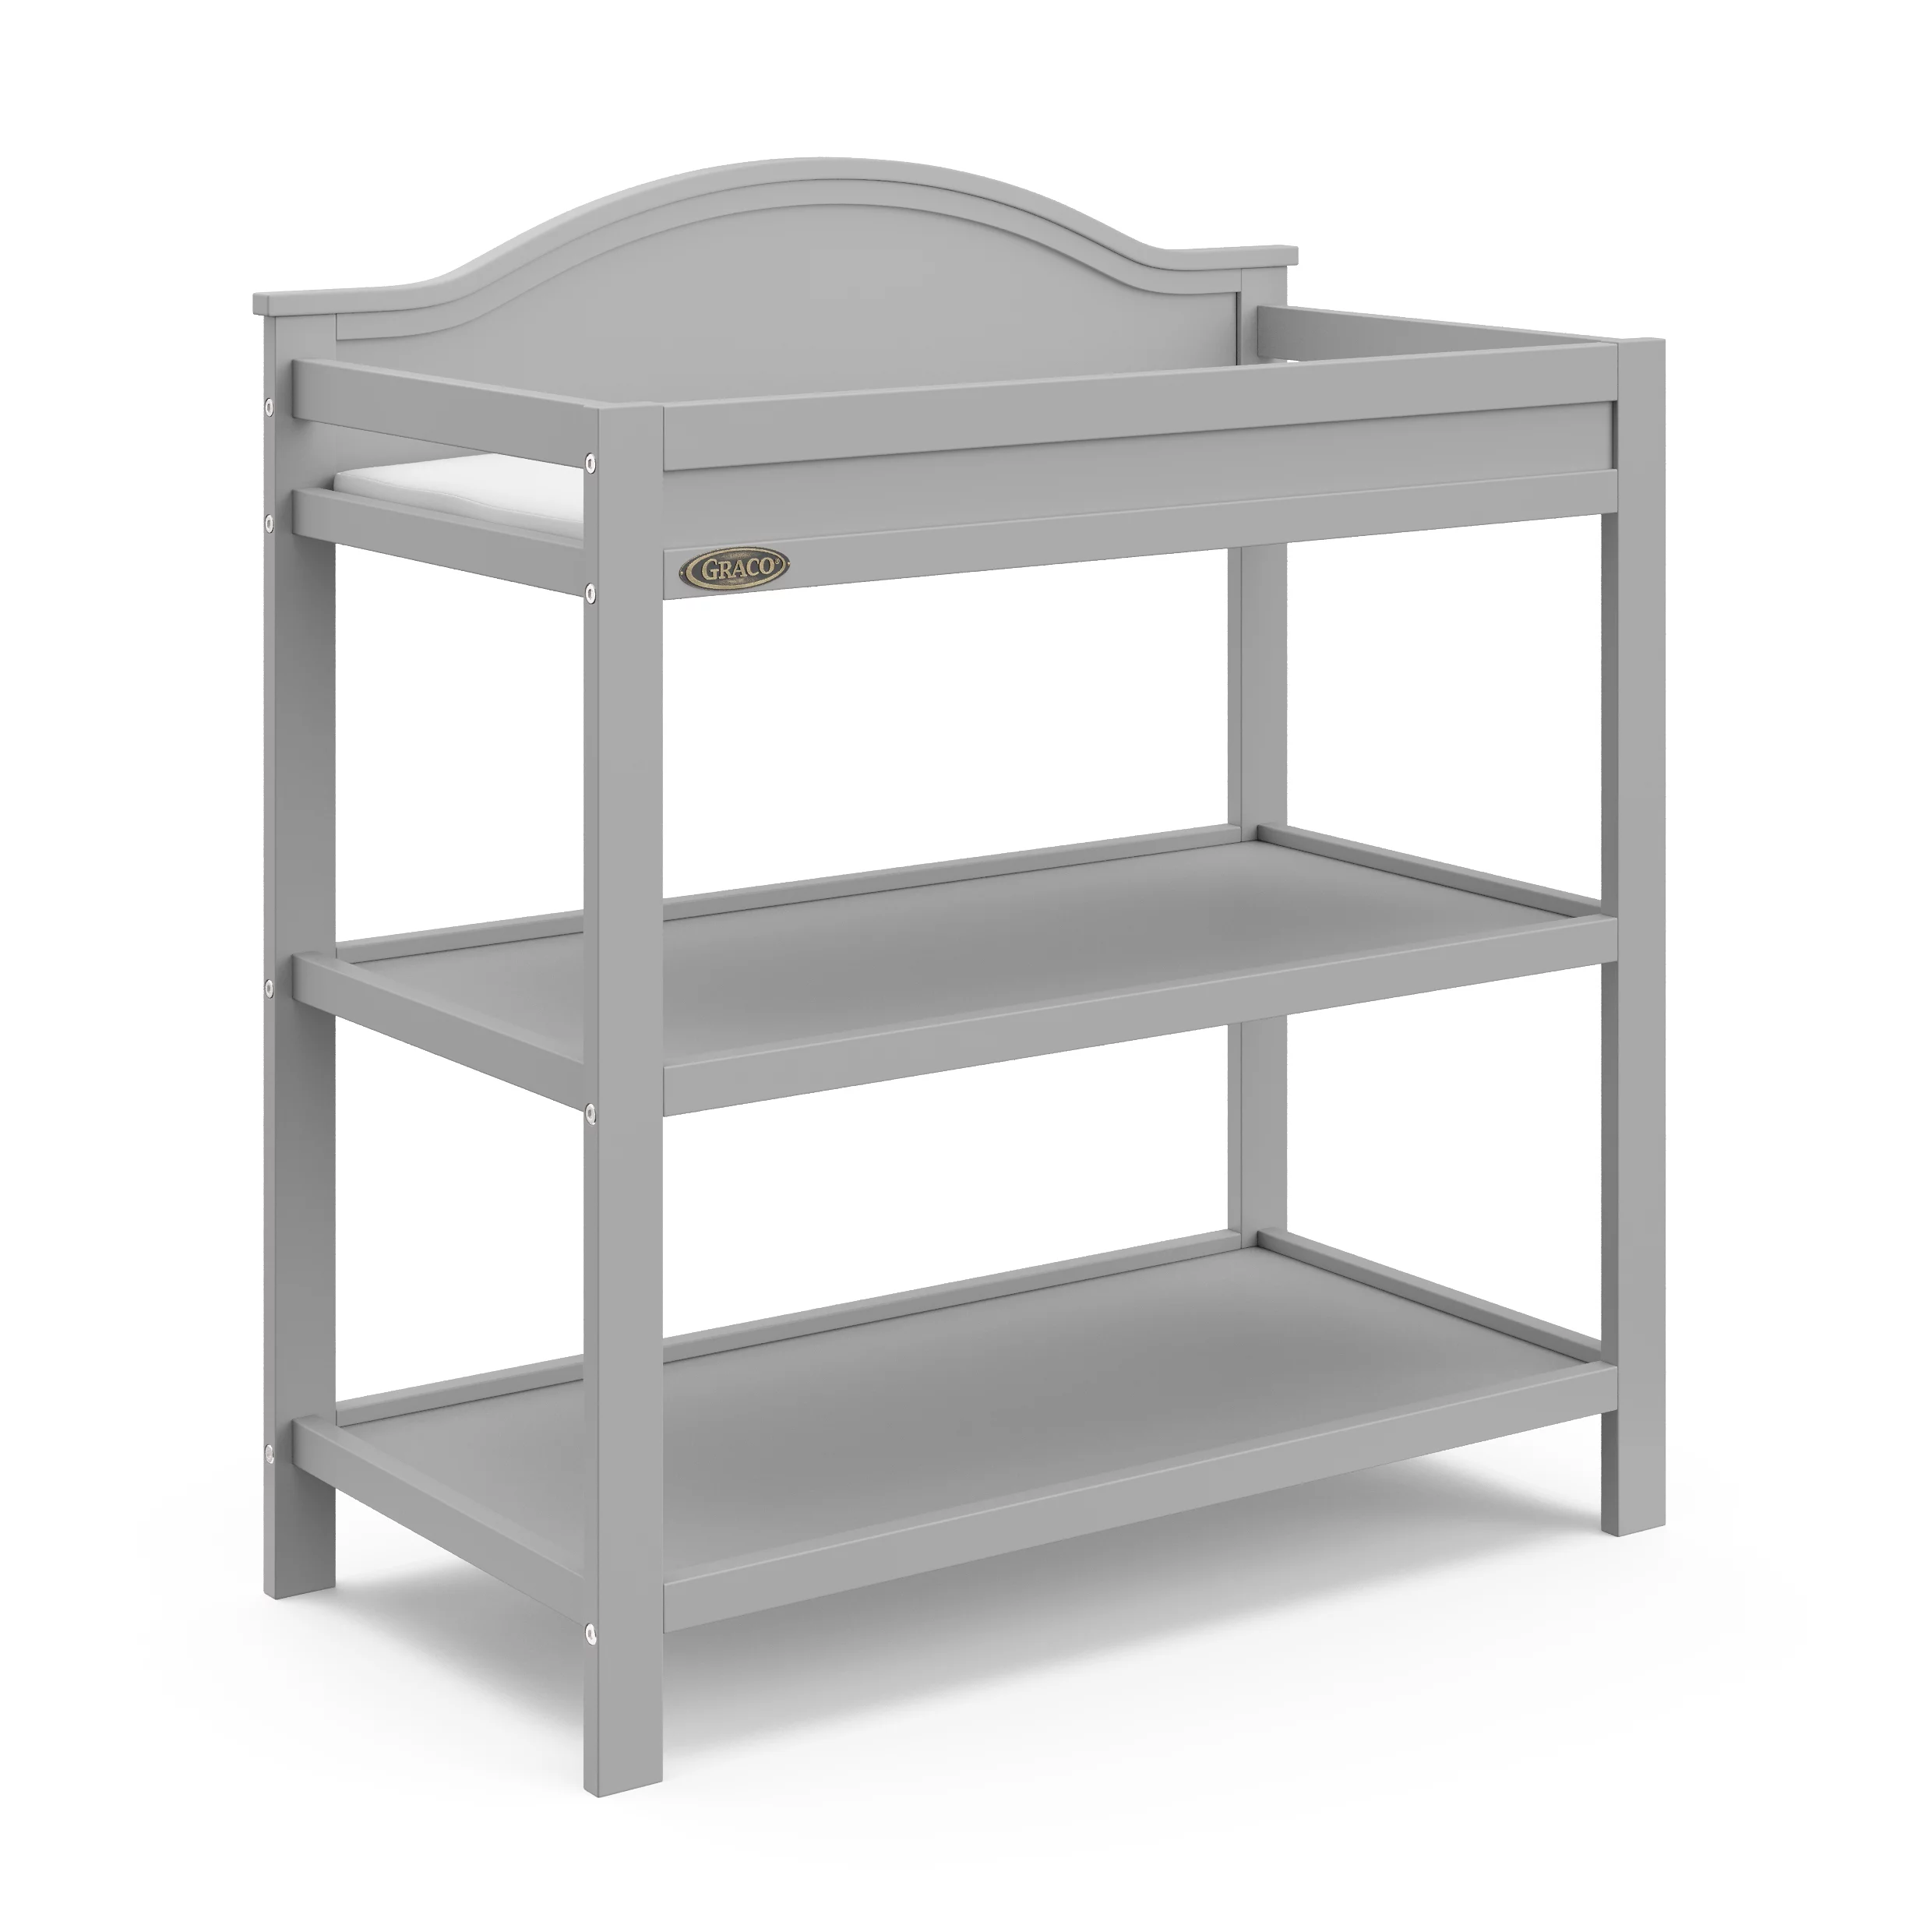 Graco Story Customizable Changing Table by Graco, Pebble Gray